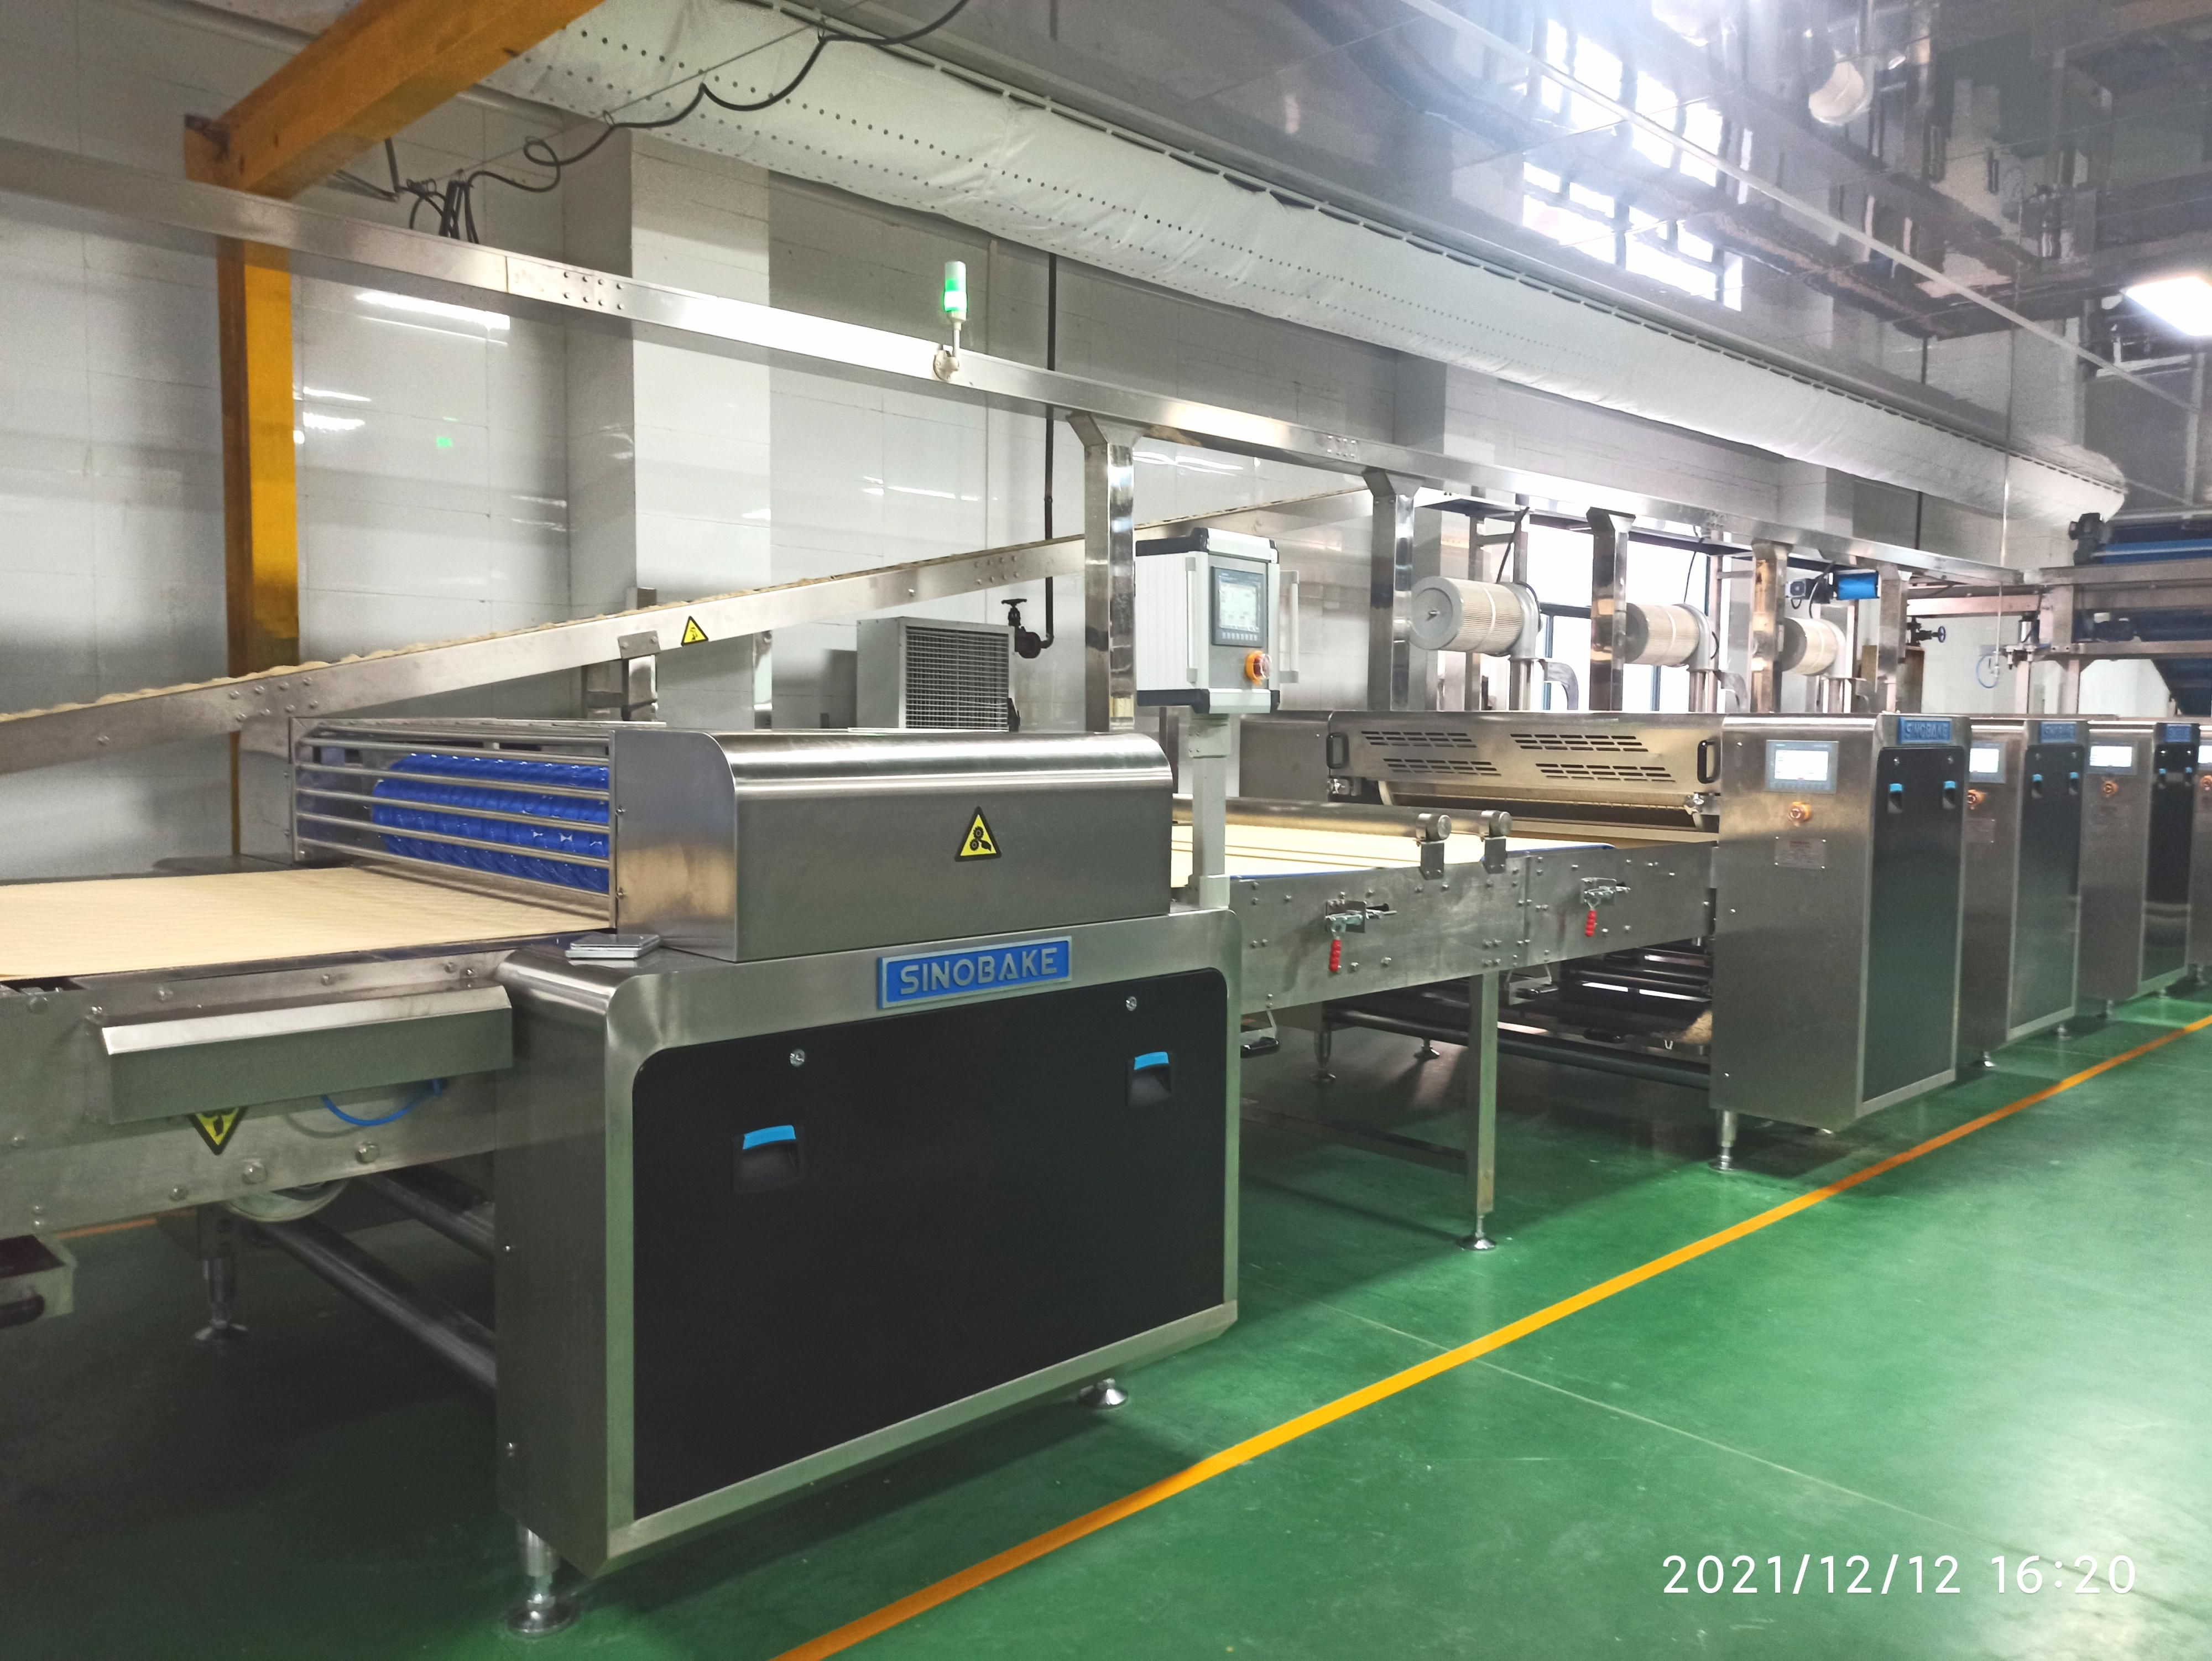 Biscuit Dough Forming System With Laminator And Rotary Cutter